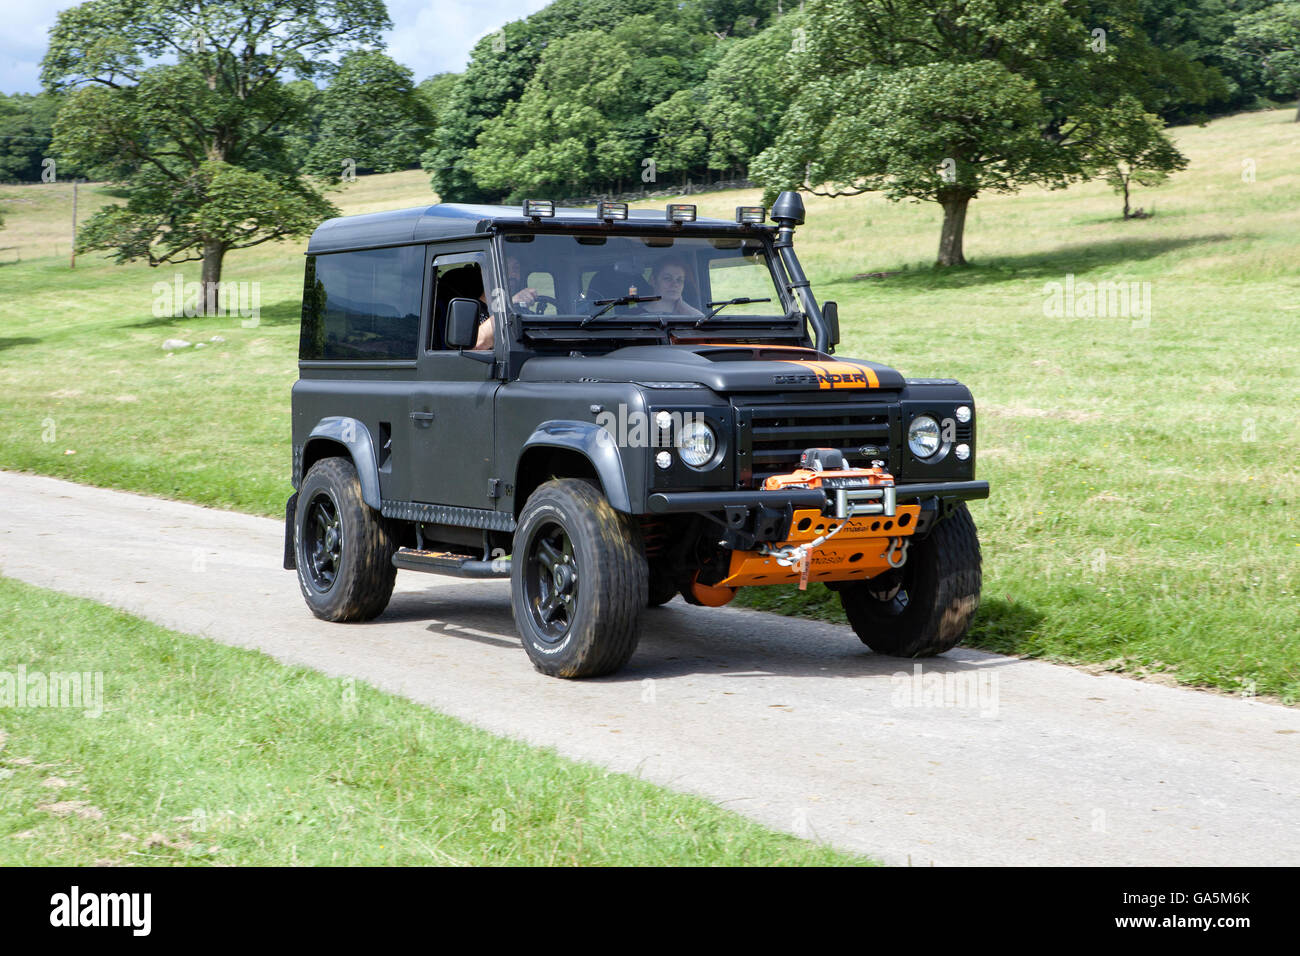 SWB Land Rover offroad 4x4 with snorkel & winch at Leighton Hall Classic Car Rally, Carnforth, Lancashire, UK.  3rd July, 2016.  The annual classic car rally takes place at the magnificent Leighton Hall in Carnforth in Lancashire.  The spectator event drew thousands of visitors to this scenic part of the country on the north west coast of England. Stock Photo